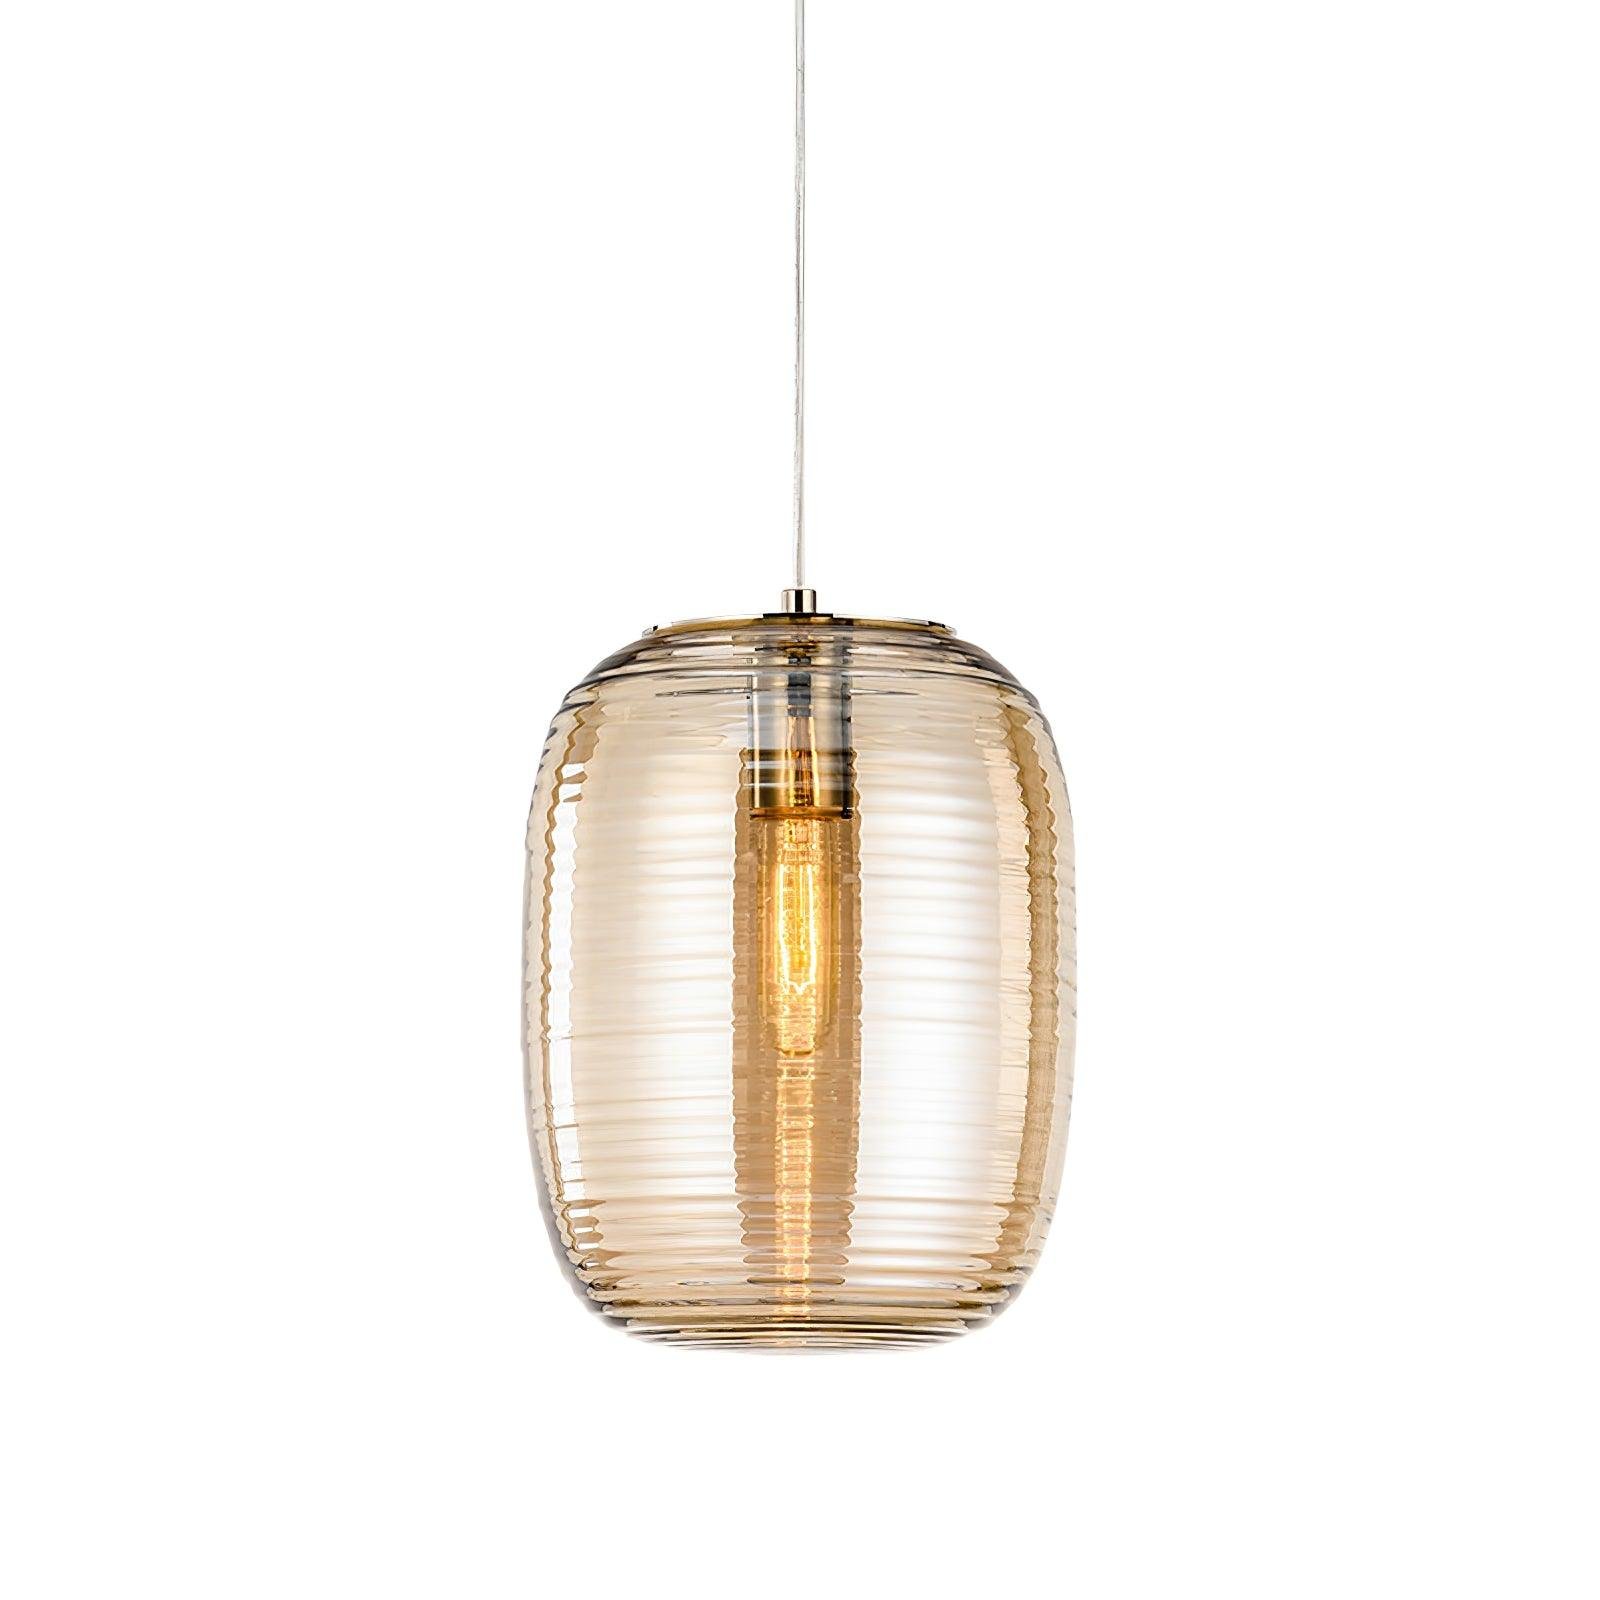 Brown Joselina Glass Pendant Light, Diameter 9.8 inches x Height 11.8 inches (25cm x 30cm)